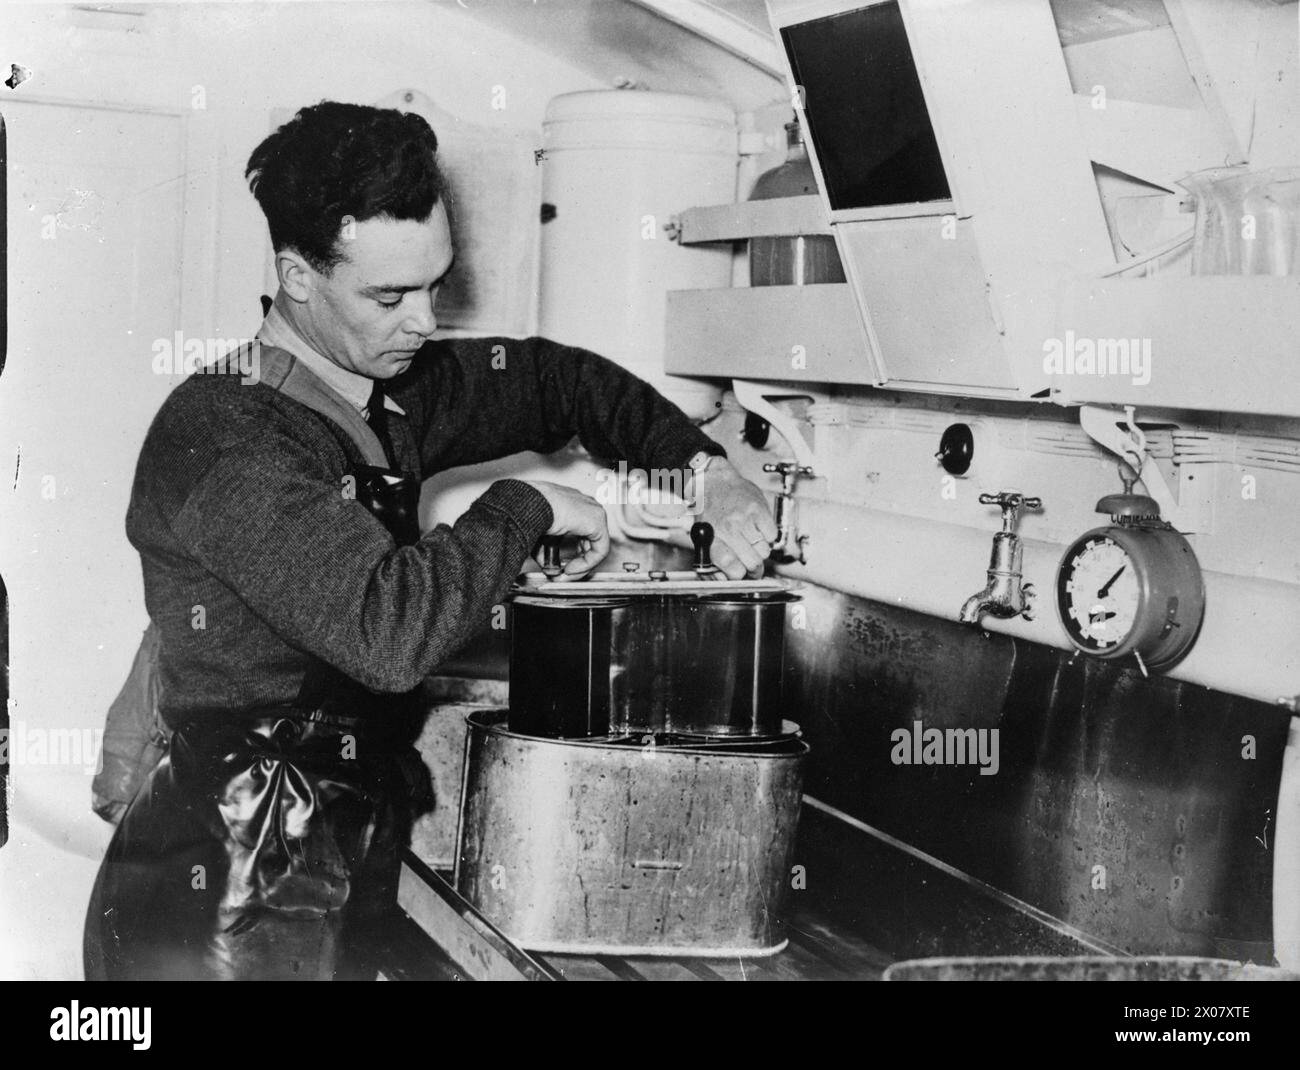 ROYAL AIR FORCE: FRANCE, 1939-1940. - A photographer removes developed aerial reconnaissance film (taken by an F.24 aerial camera) from a developing tank in a Mobile Darkrooms tender at the Headquarters of No. 71 Wing RAF, Bétheniville Stock Photo